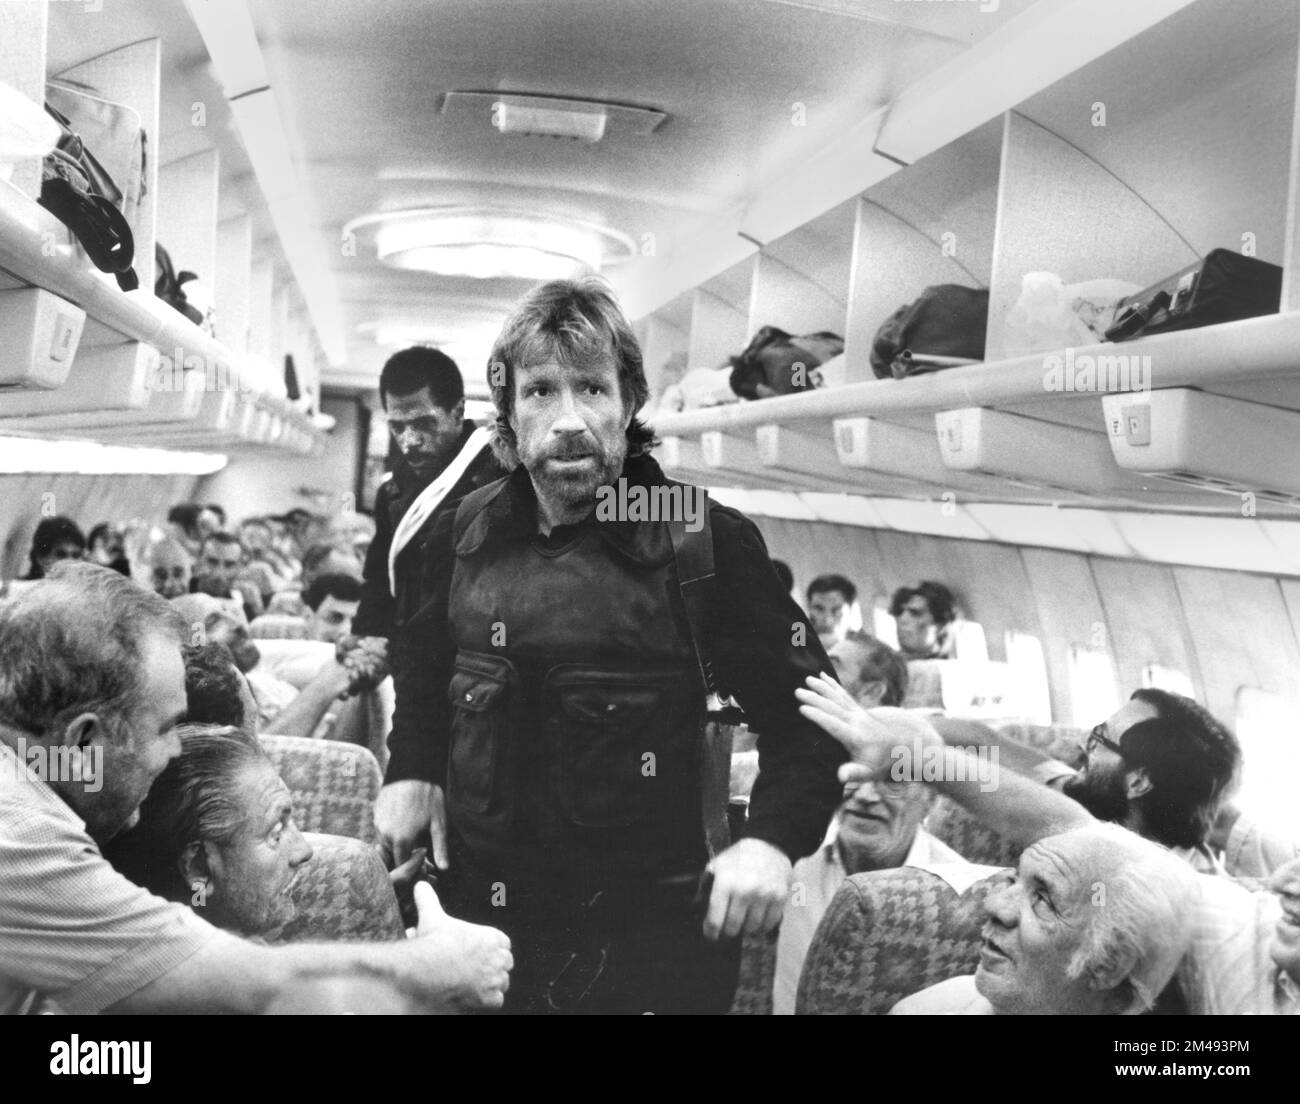 Steve James, Chuck Norris, on-set of the Film, 'The Delta Force', The Cannon Group, 1986 Stock Photo